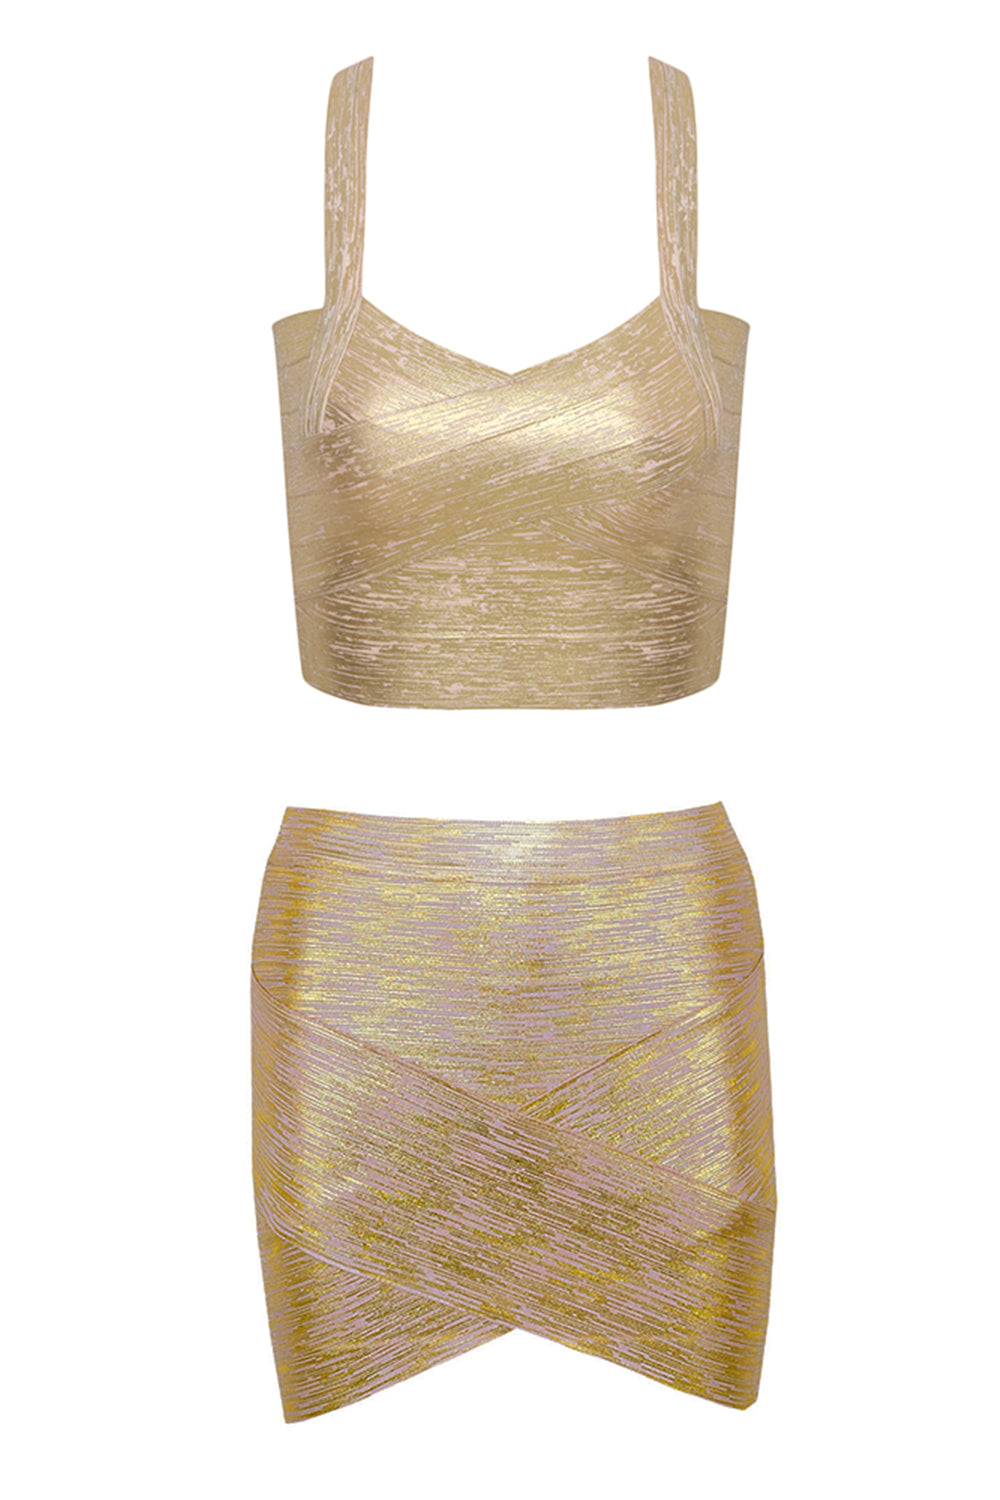 gold top, gold bandage top, gold crop top, bandage top for women, top, bandage top, tank top, crop top, mini bandage top, sexy bandage top, metallic bandage top, skirt, bandage skirt, gold bandage skirt, high waist bandage skirt, metallic bandage skirt, mini bandage dress, top skirt two pieces set, women’s set, outfit set